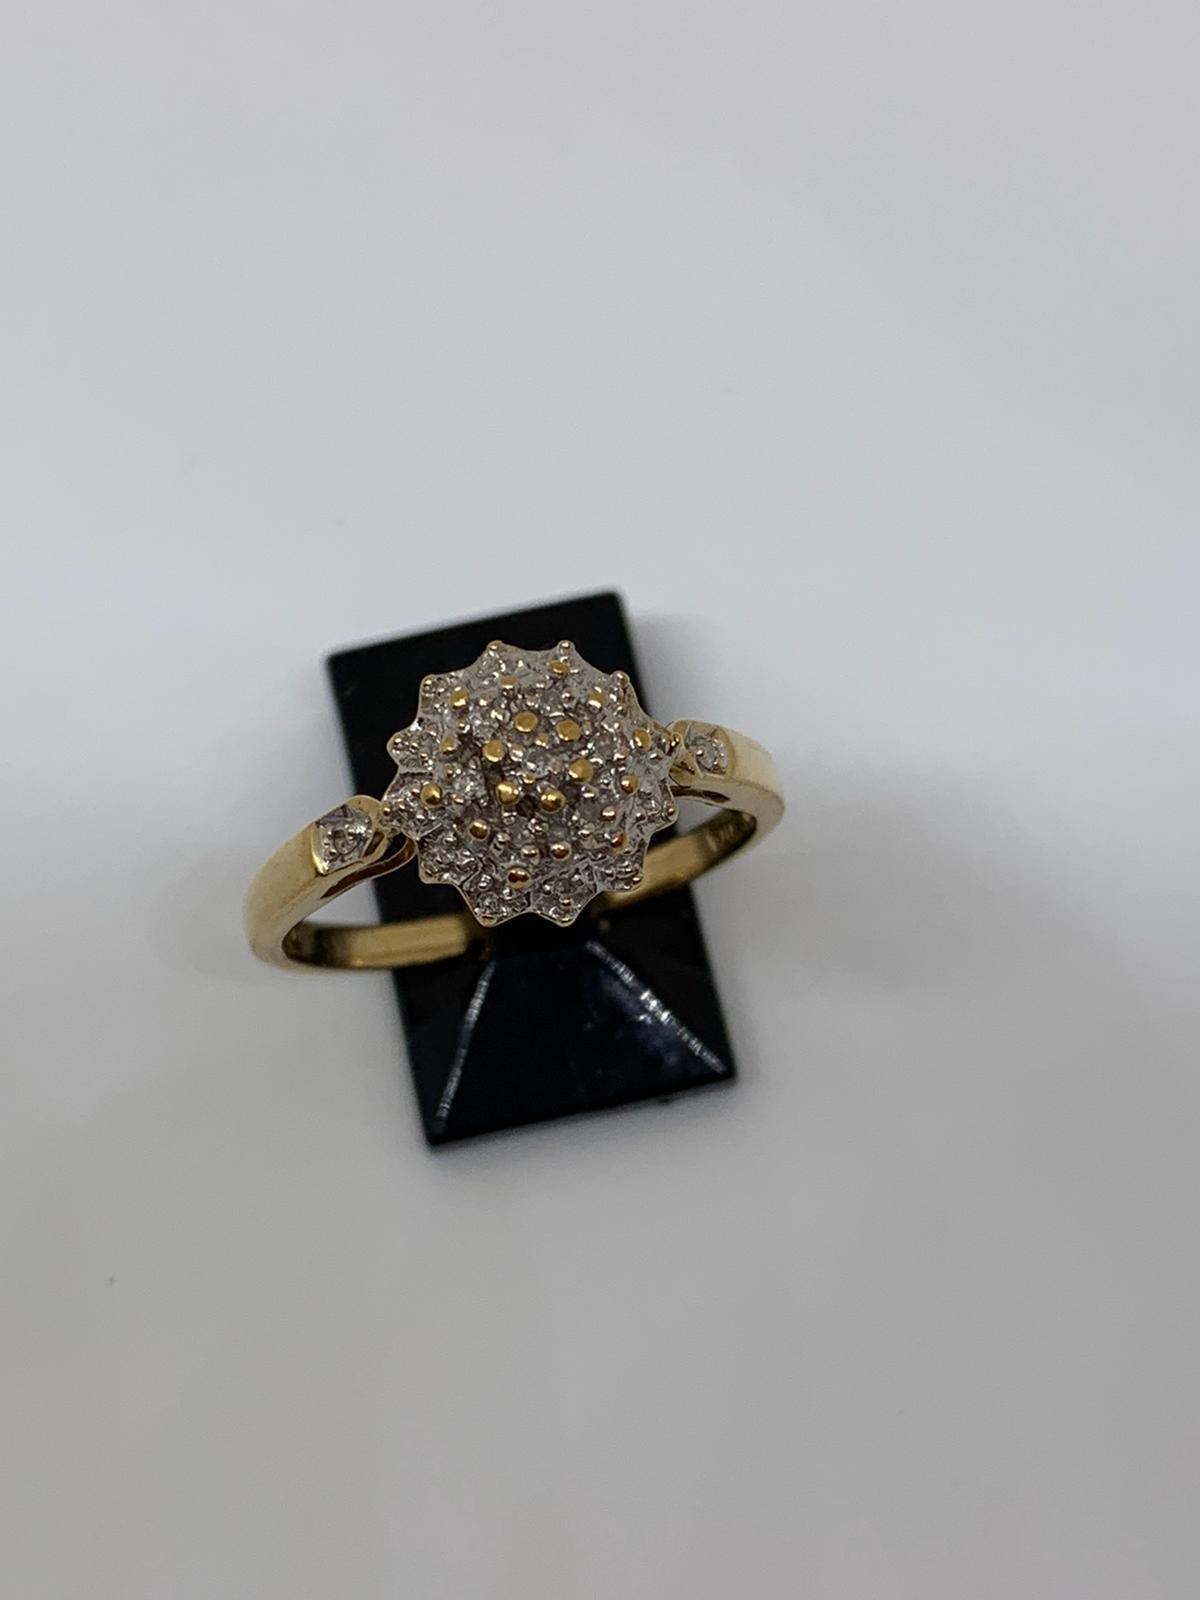 9ct gold ring - Image 2 of 2